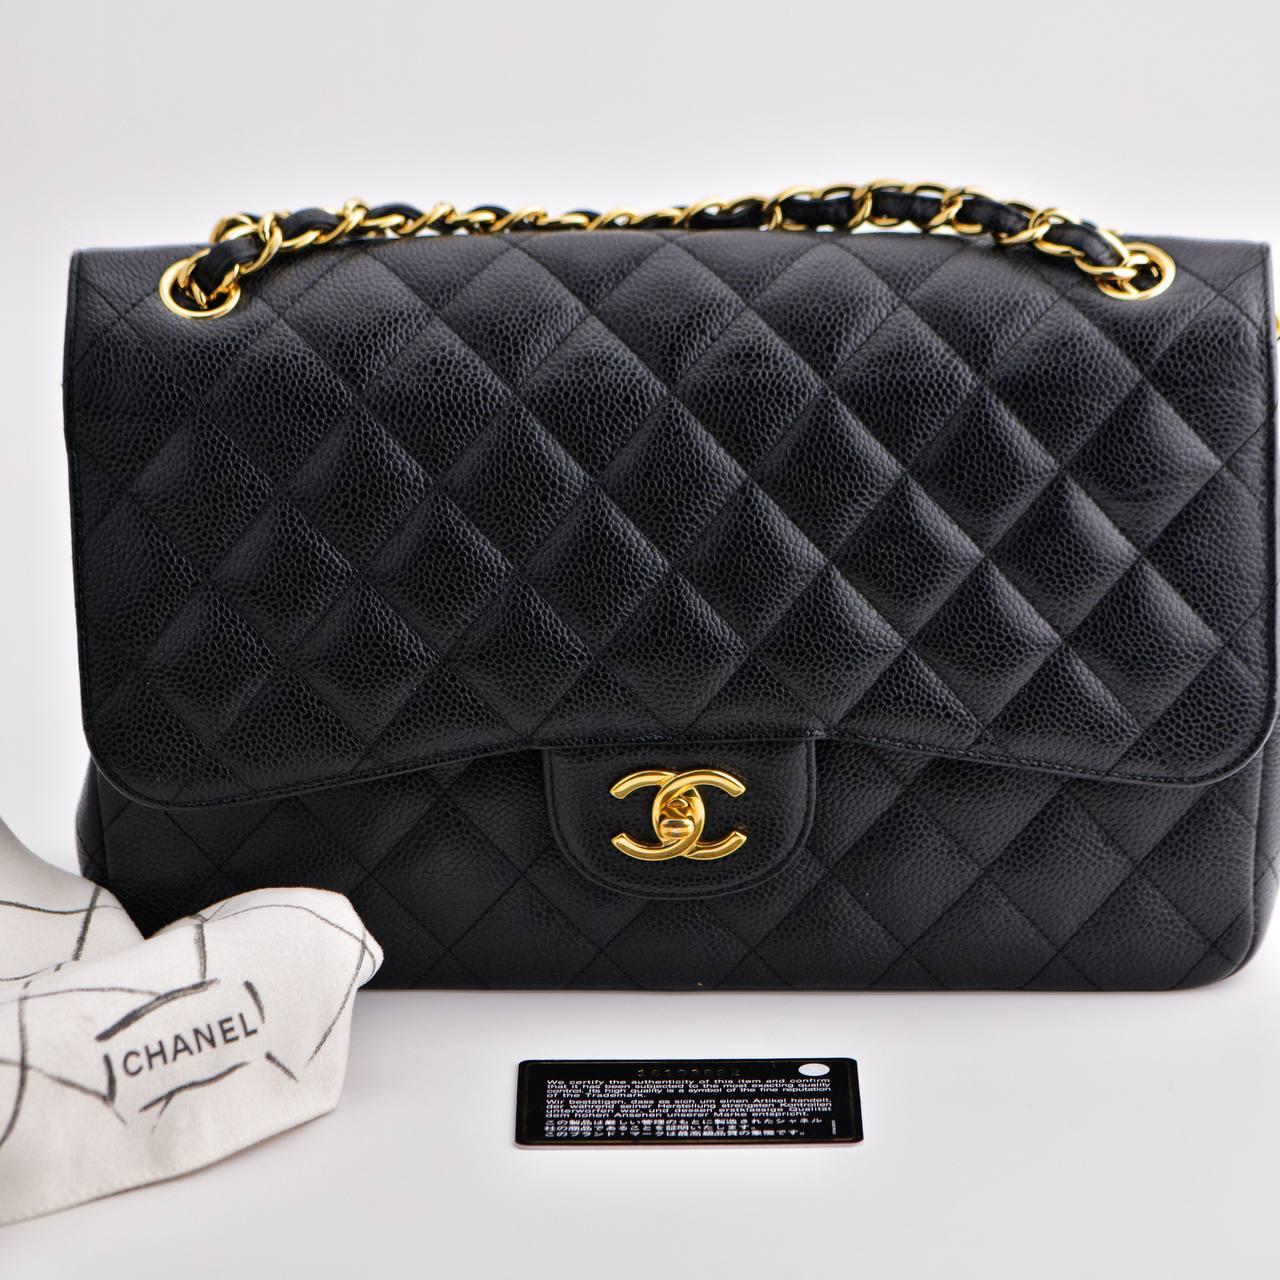 SKU 	AT-1615
Brand	Chanel
Model	Timeless Classic Double Flap
Serial No.	16******
Color	Black
RRP: Approx. £8140 / $9500
__________________________________________________________________________________
Date	Approx.